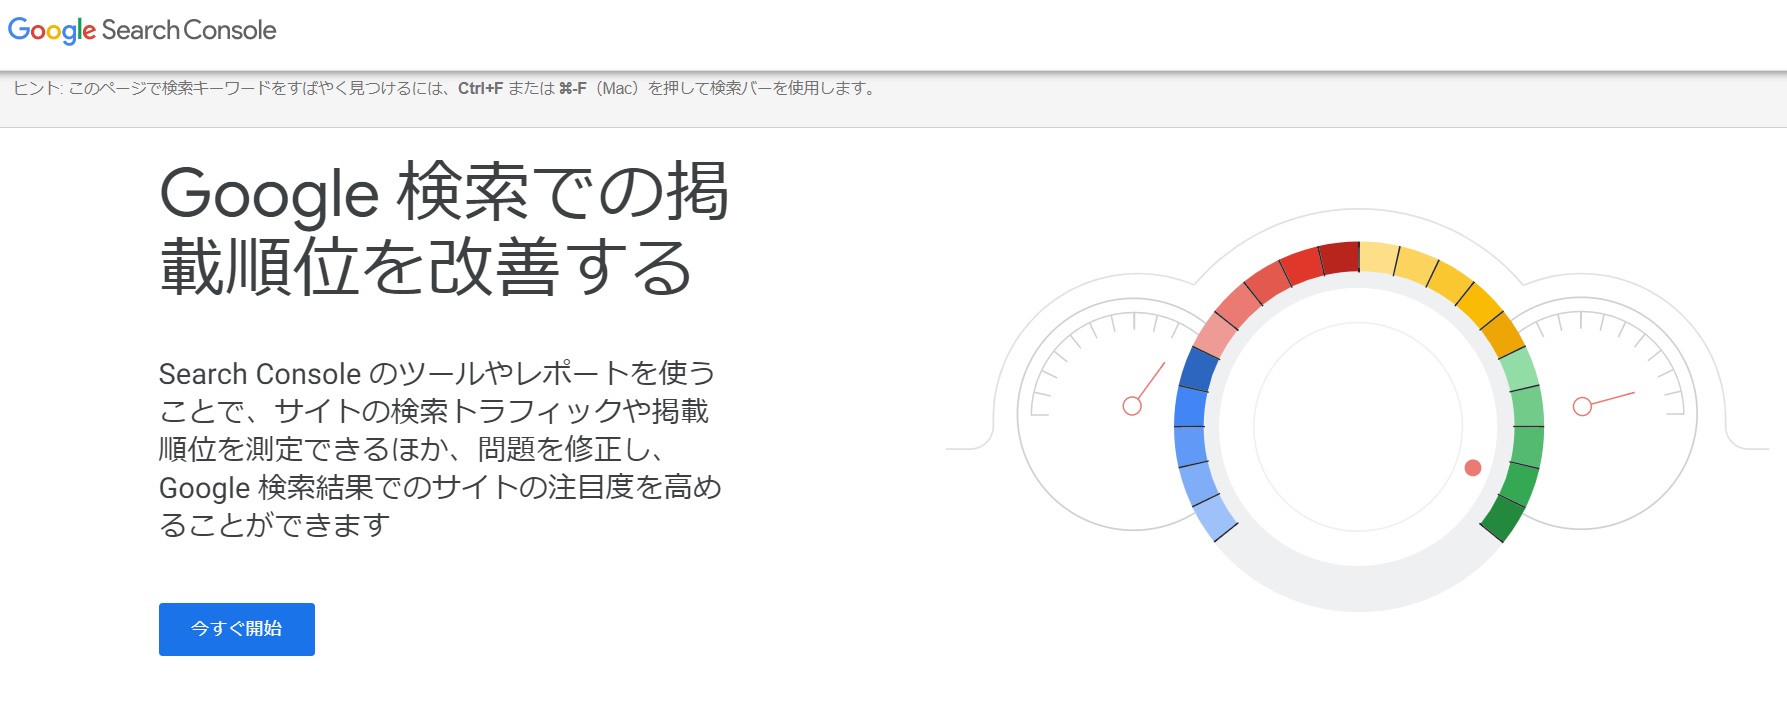 Google search consoleを始める